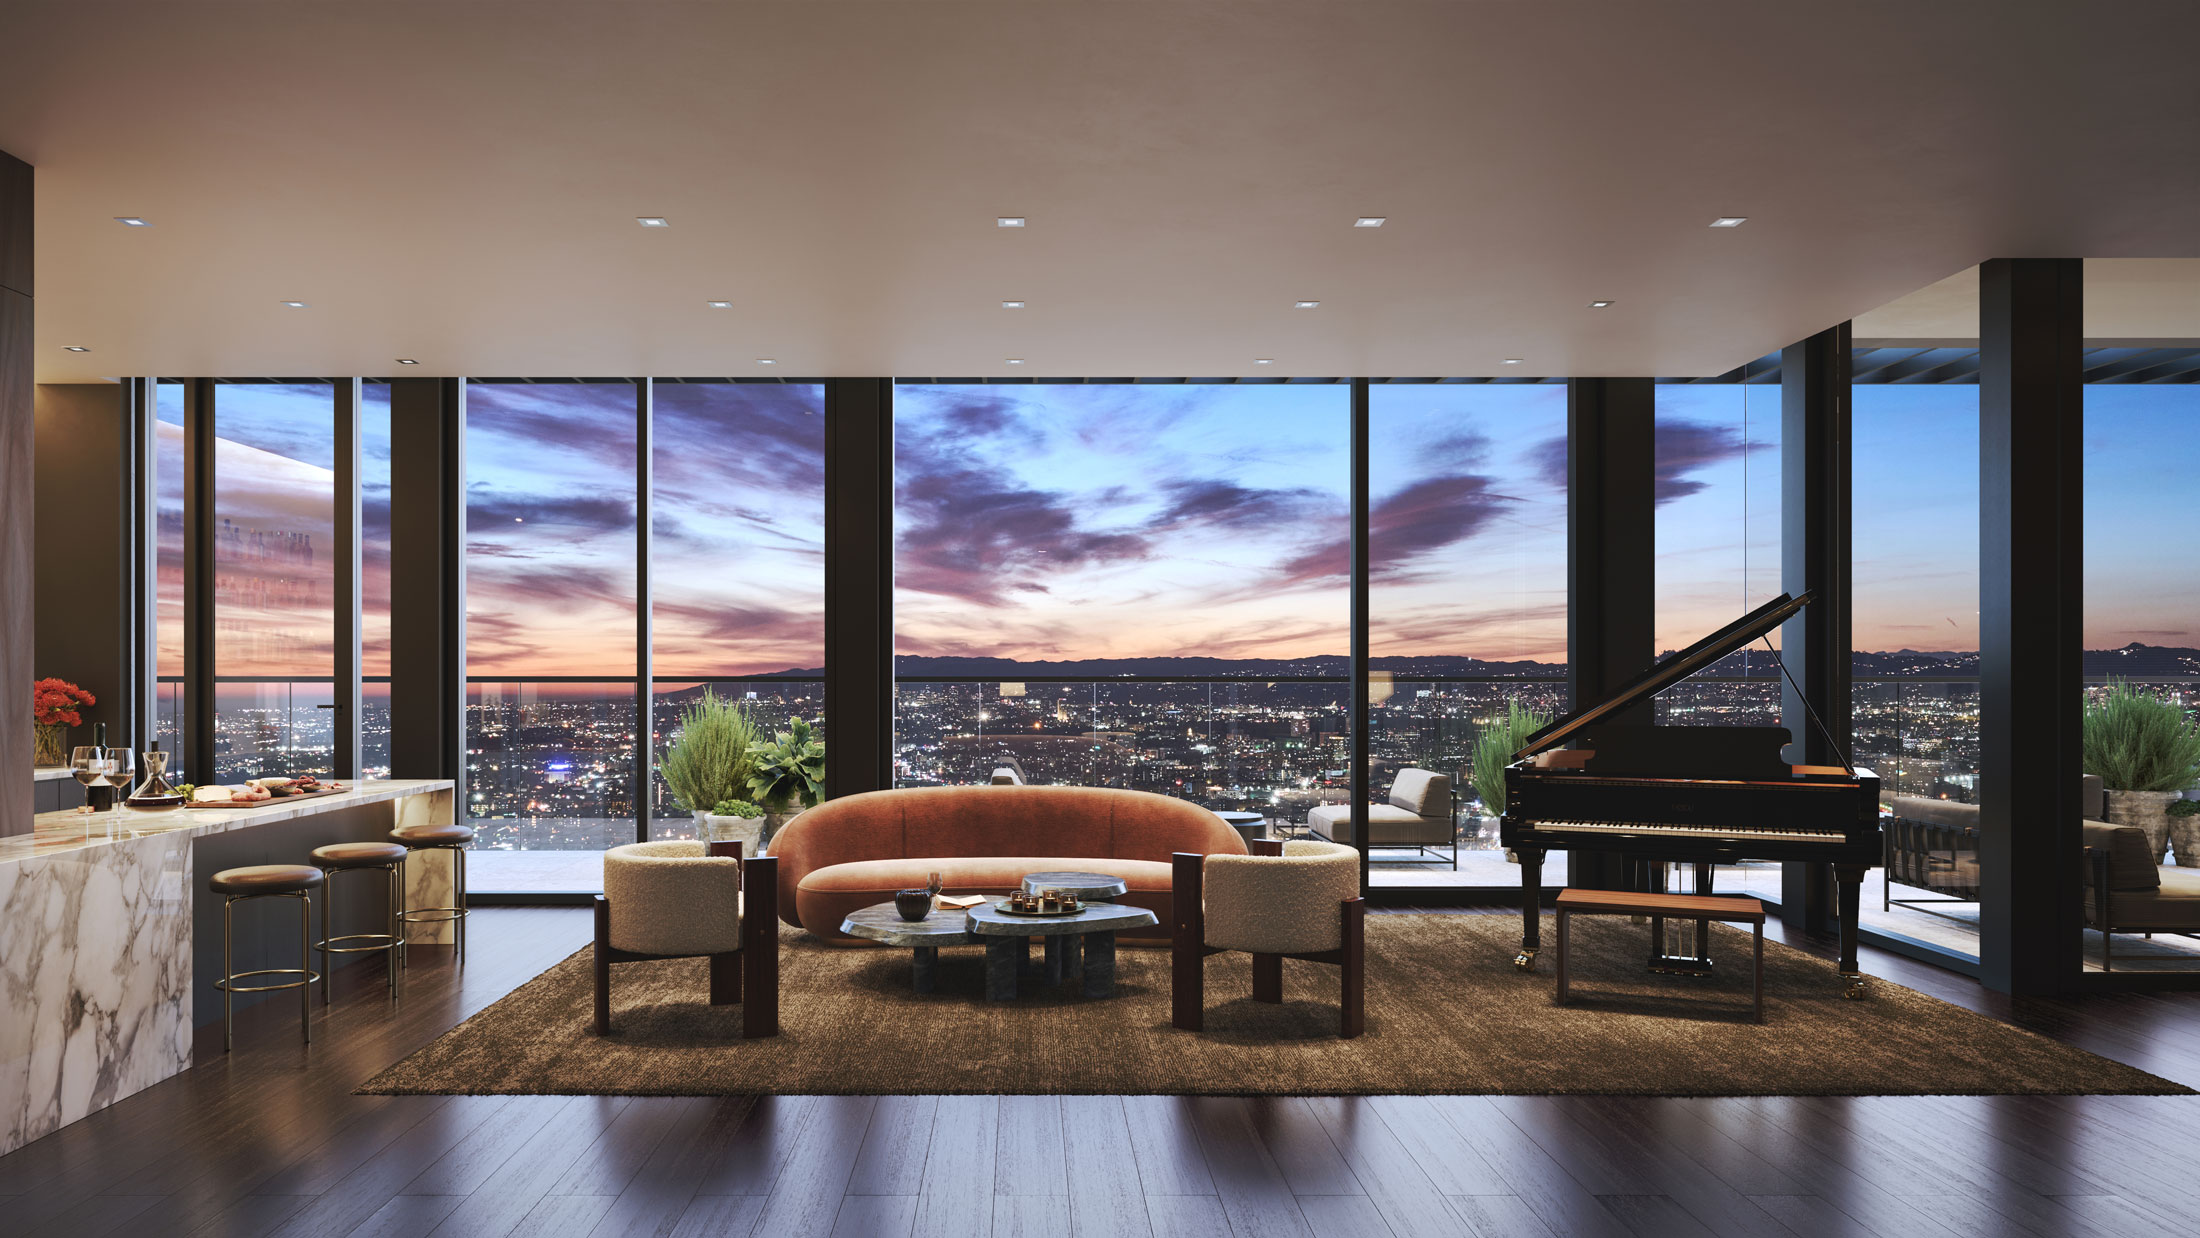 Architectural Rendering of the interior of the 755 South Figueroa Street project located in Los Angeles, California